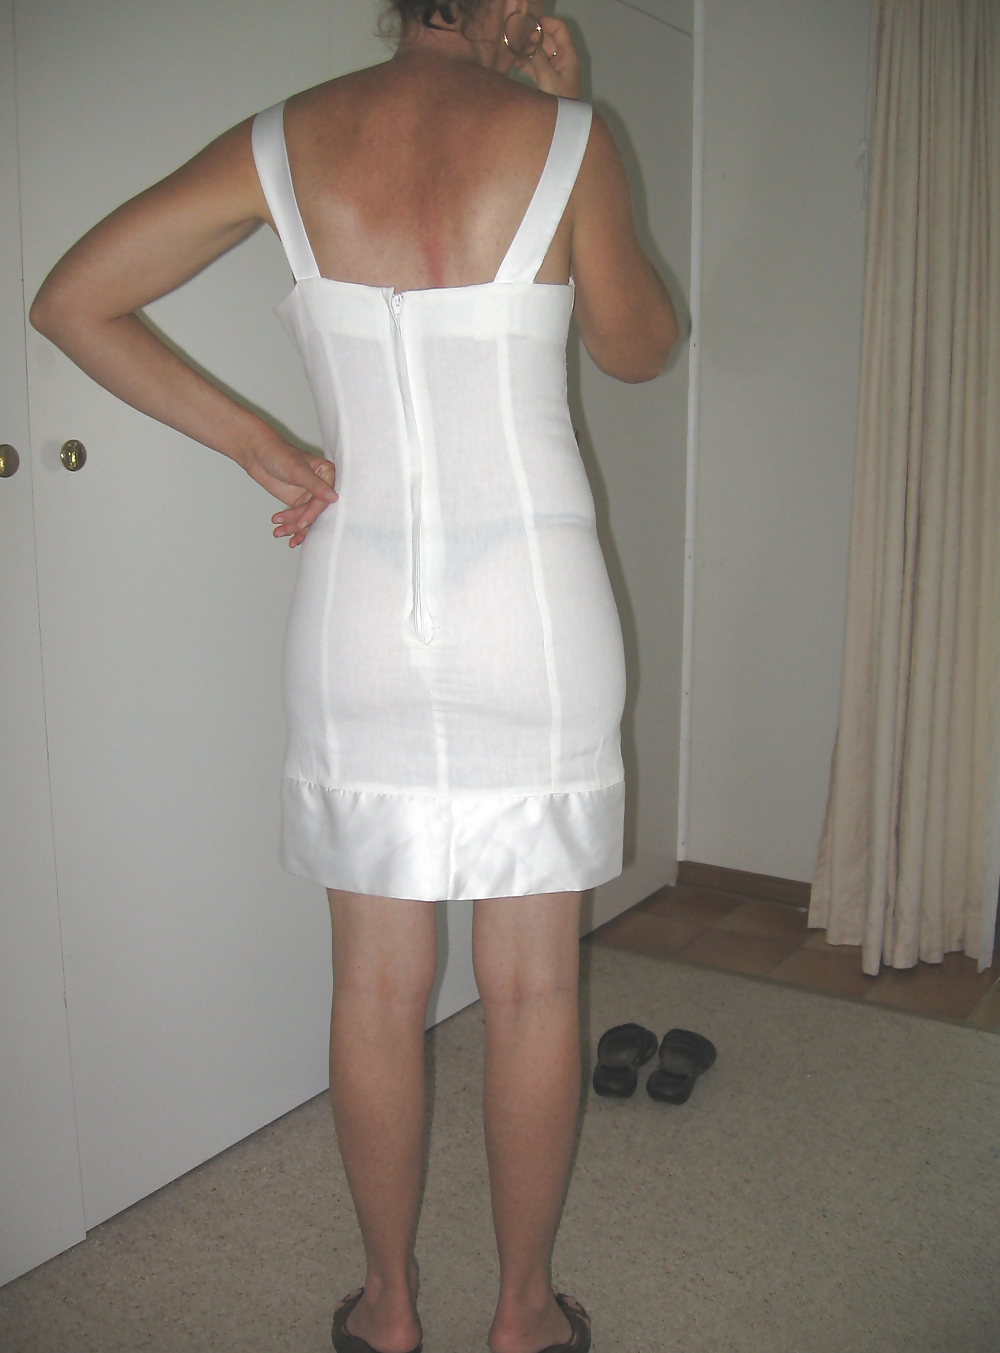 Upskirts of my redhead wife in her tight white dress #5543136